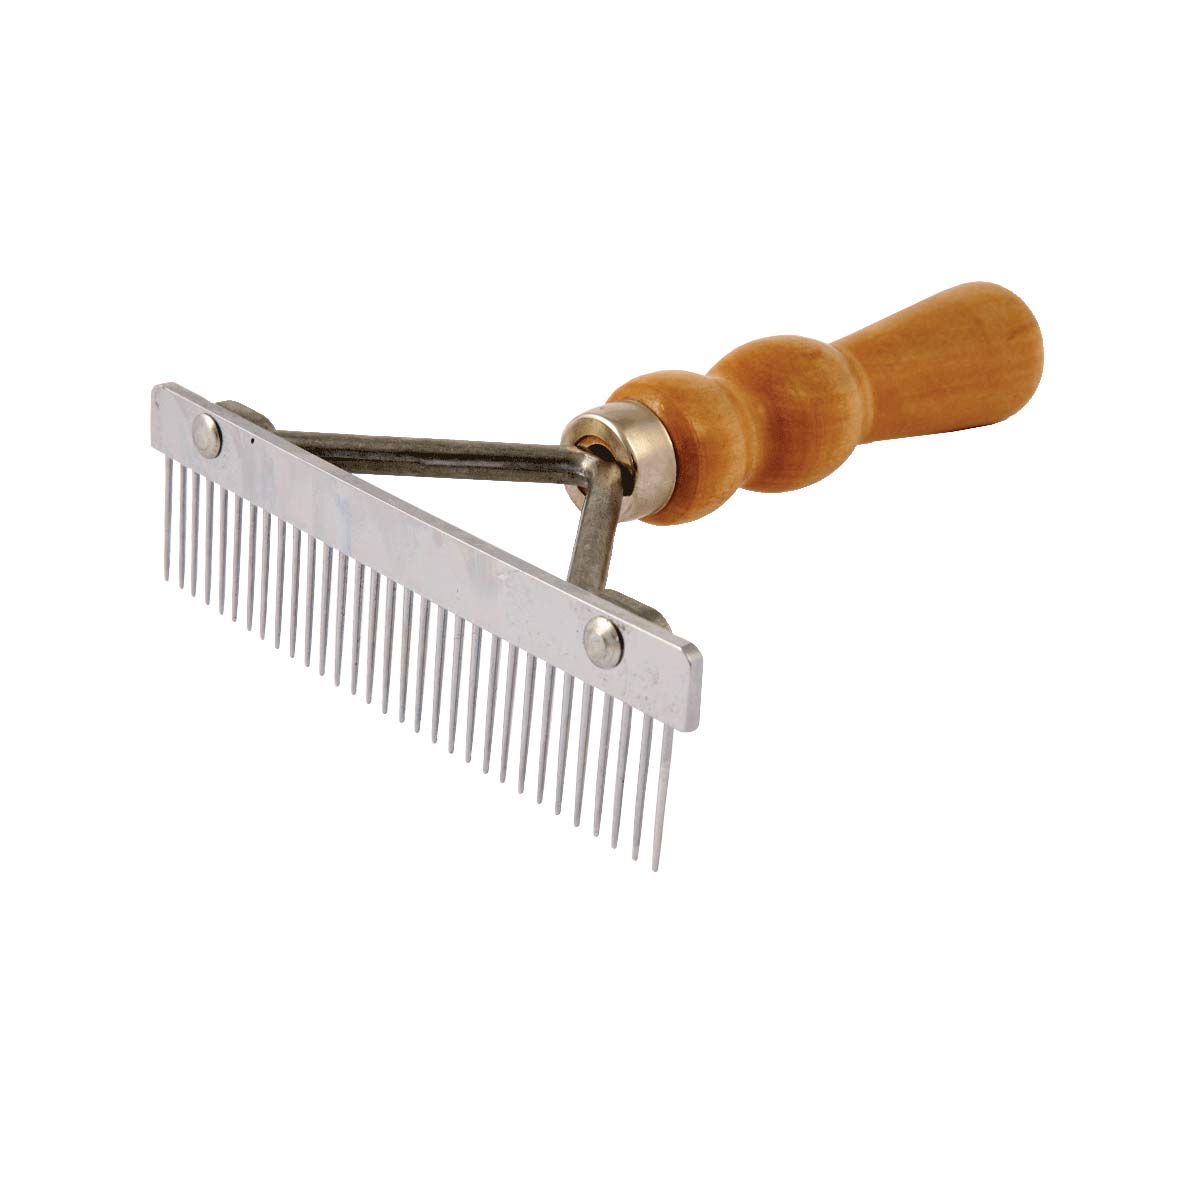 Curry Comb Cattle 5 Inch - Farm and Rural Supplies